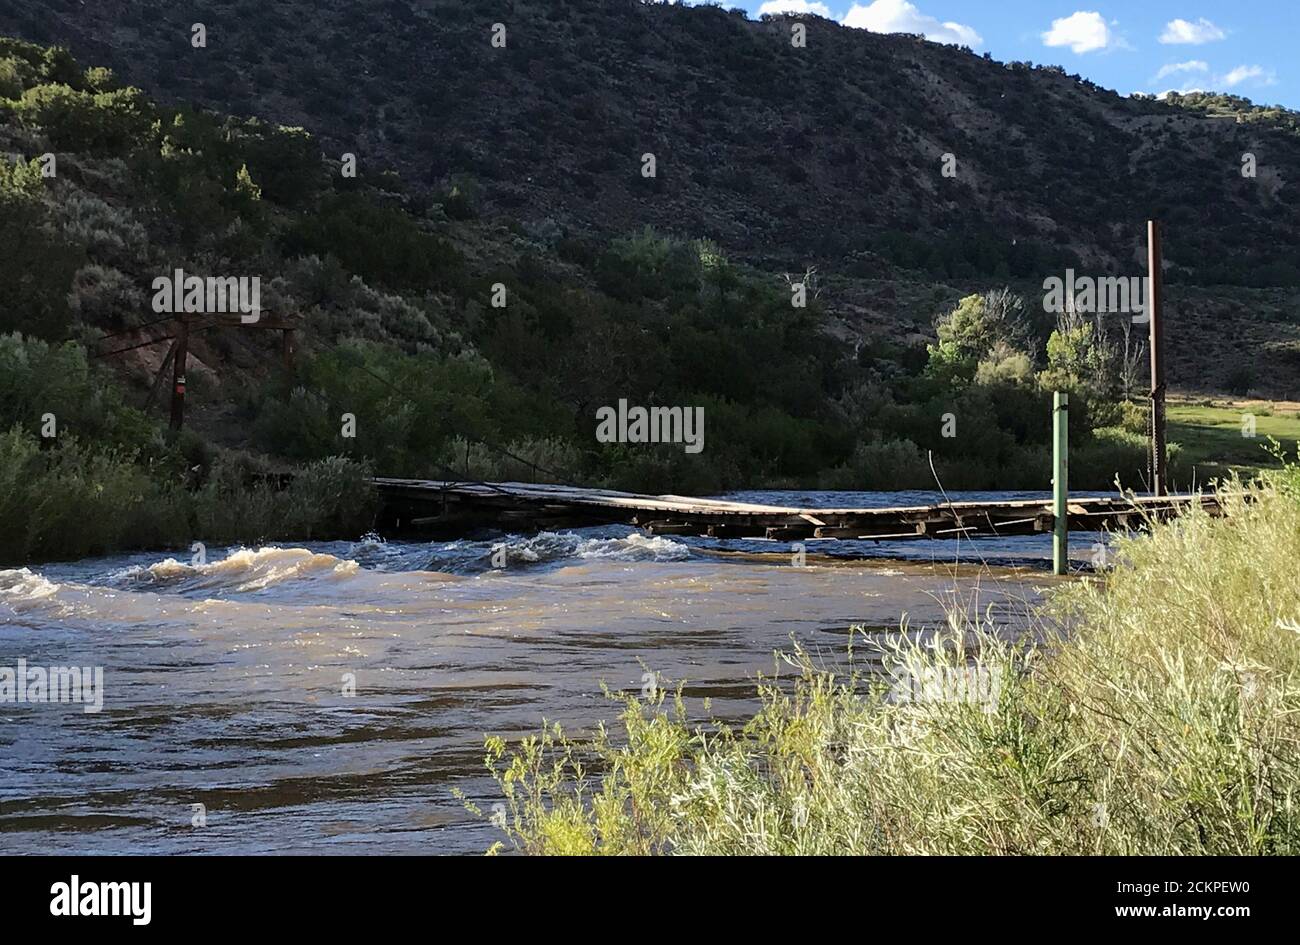 High water on the Rio Grande river close to flowing over local bridge  nicknamed Òdecapitation bridge.